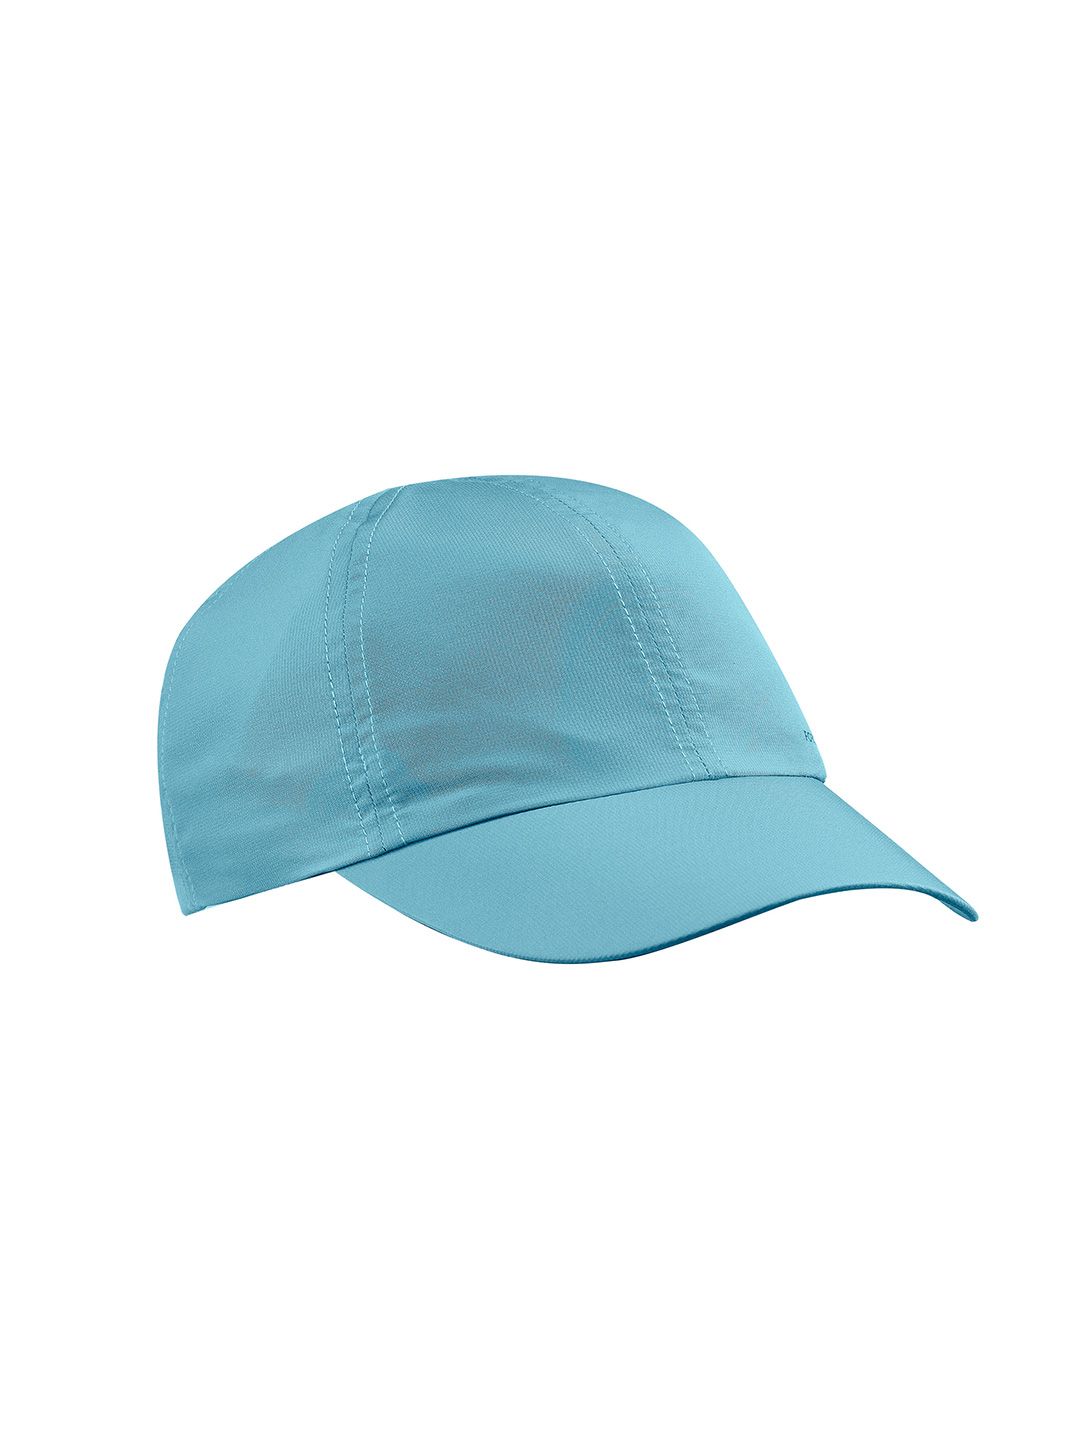 FORCLAZ By Decathlon Women Blue Solid Trekking Baseball Cap Price in India